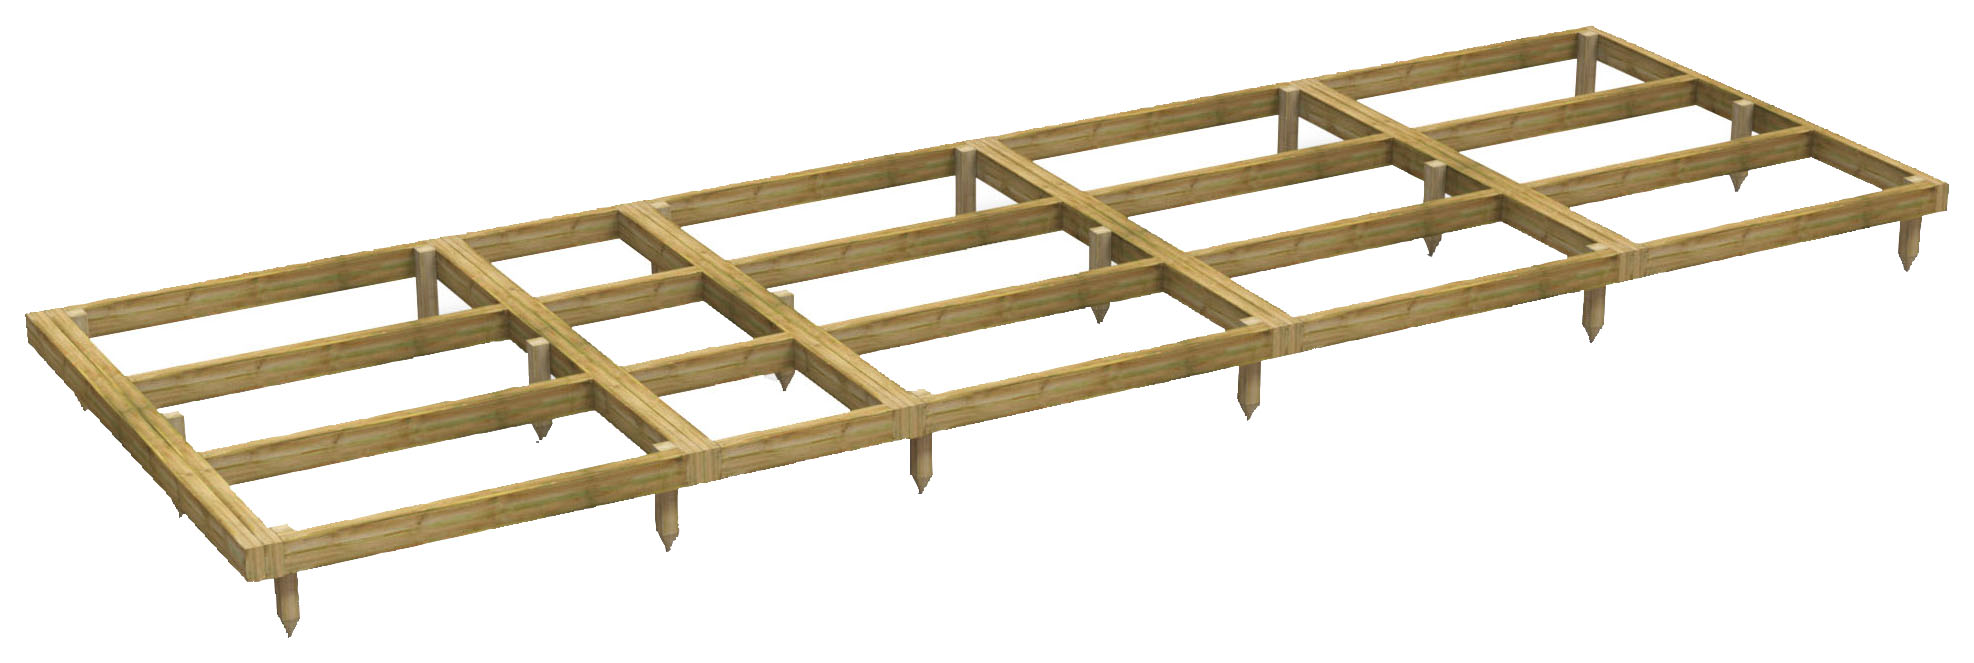 Power Sheds 18 x 6ft Pressure Treated Garden Building Base Kit